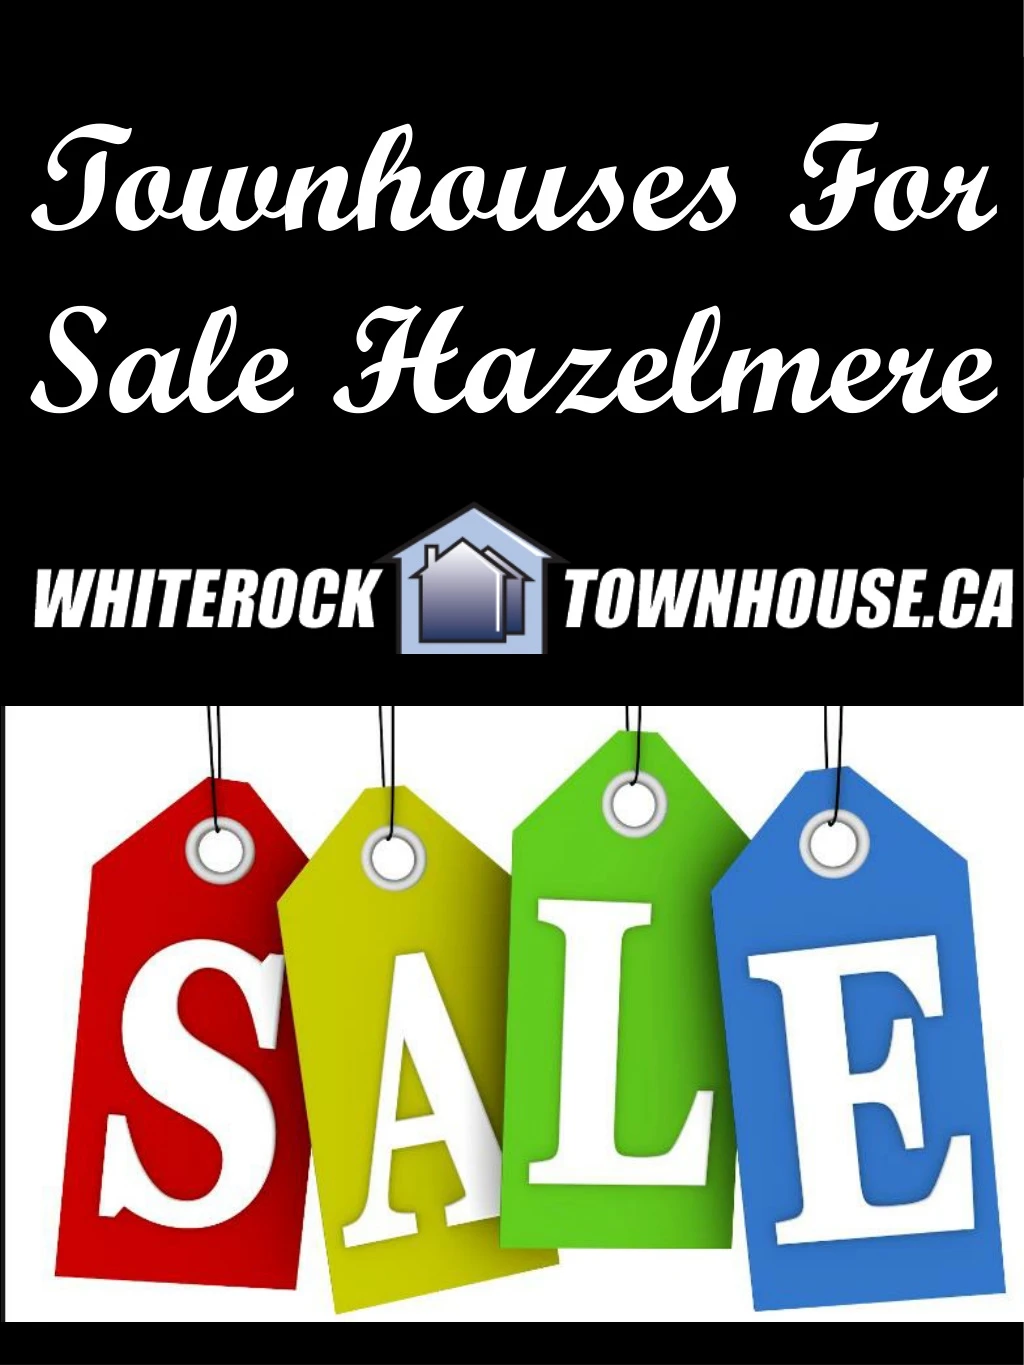 townhouses for sale hazelmere